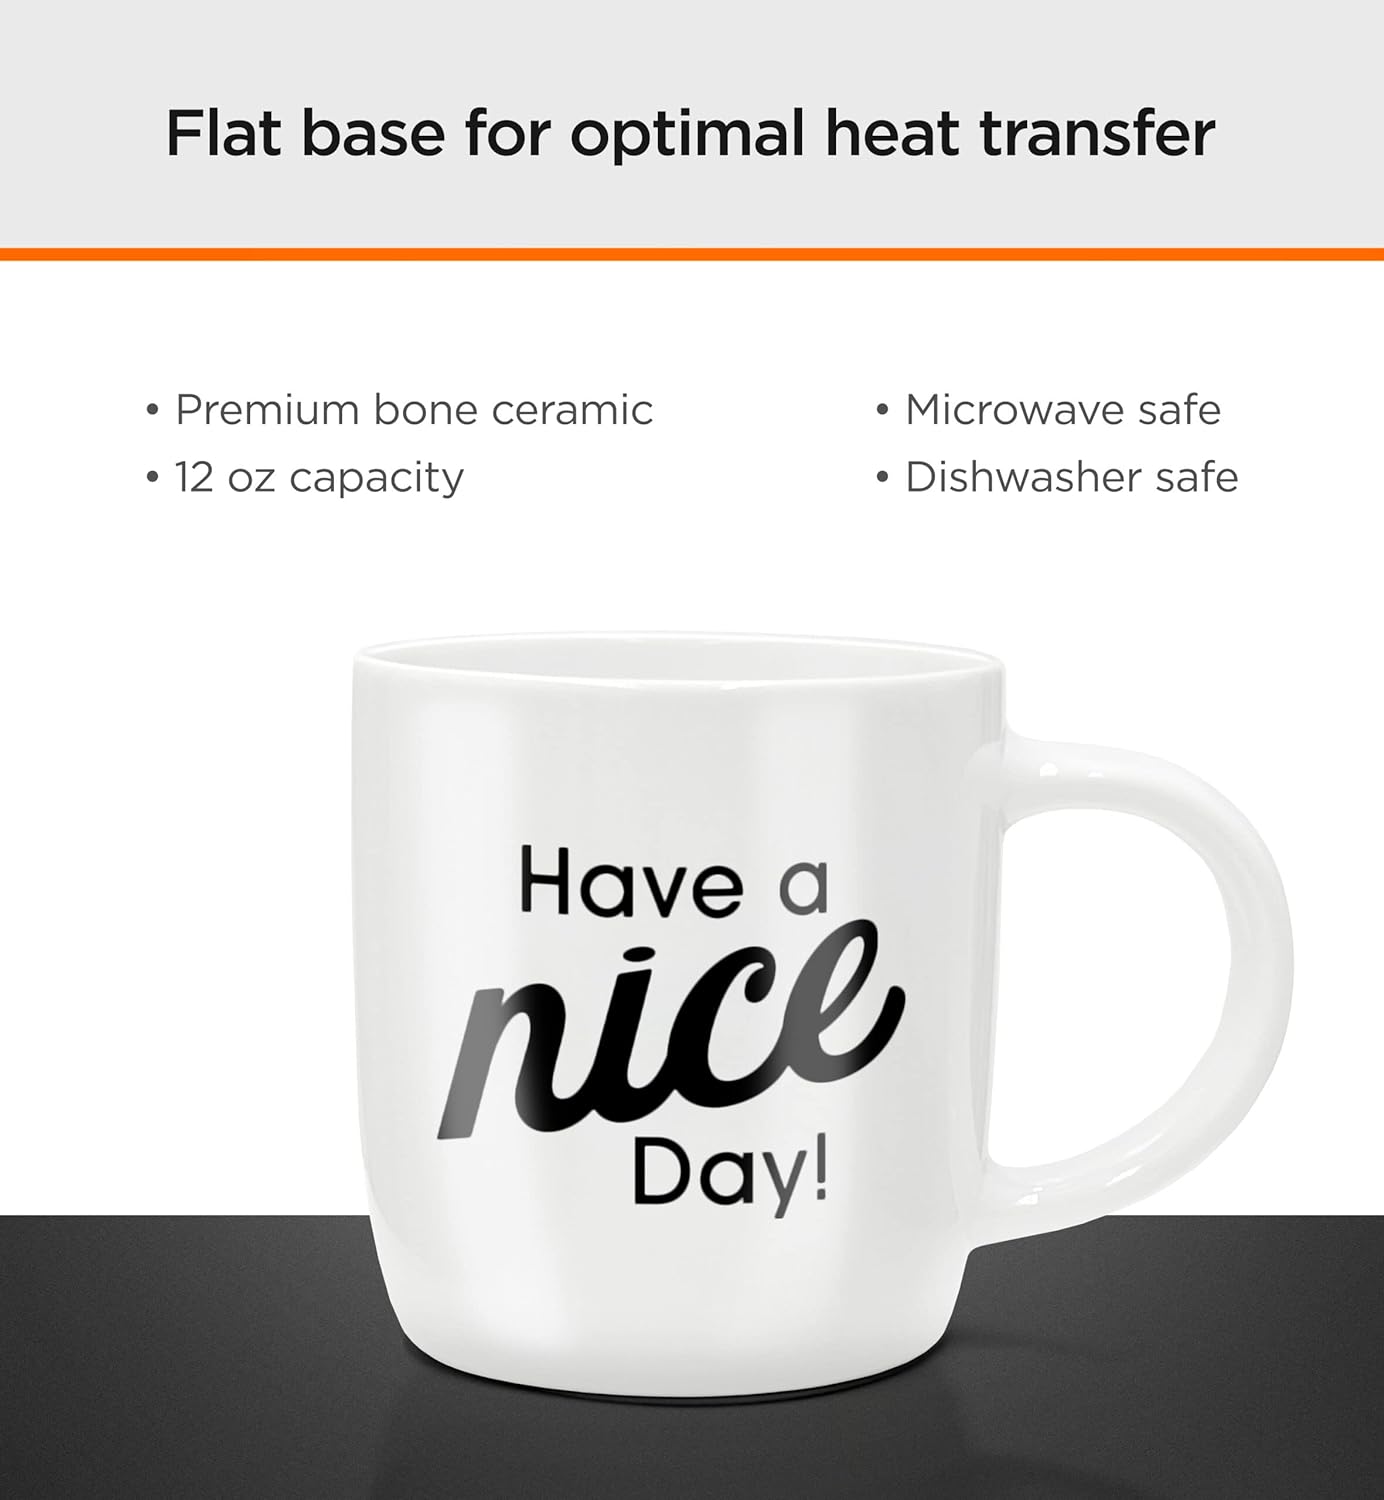 Funny Coffee Mug with Warmer Have a Nice Day Sarcastic Coffee Mug with Electric Heated Base - Novelty Christmas Gift Idea for Coworker/Coffee Lover, Men/Women (Gift Boxed)